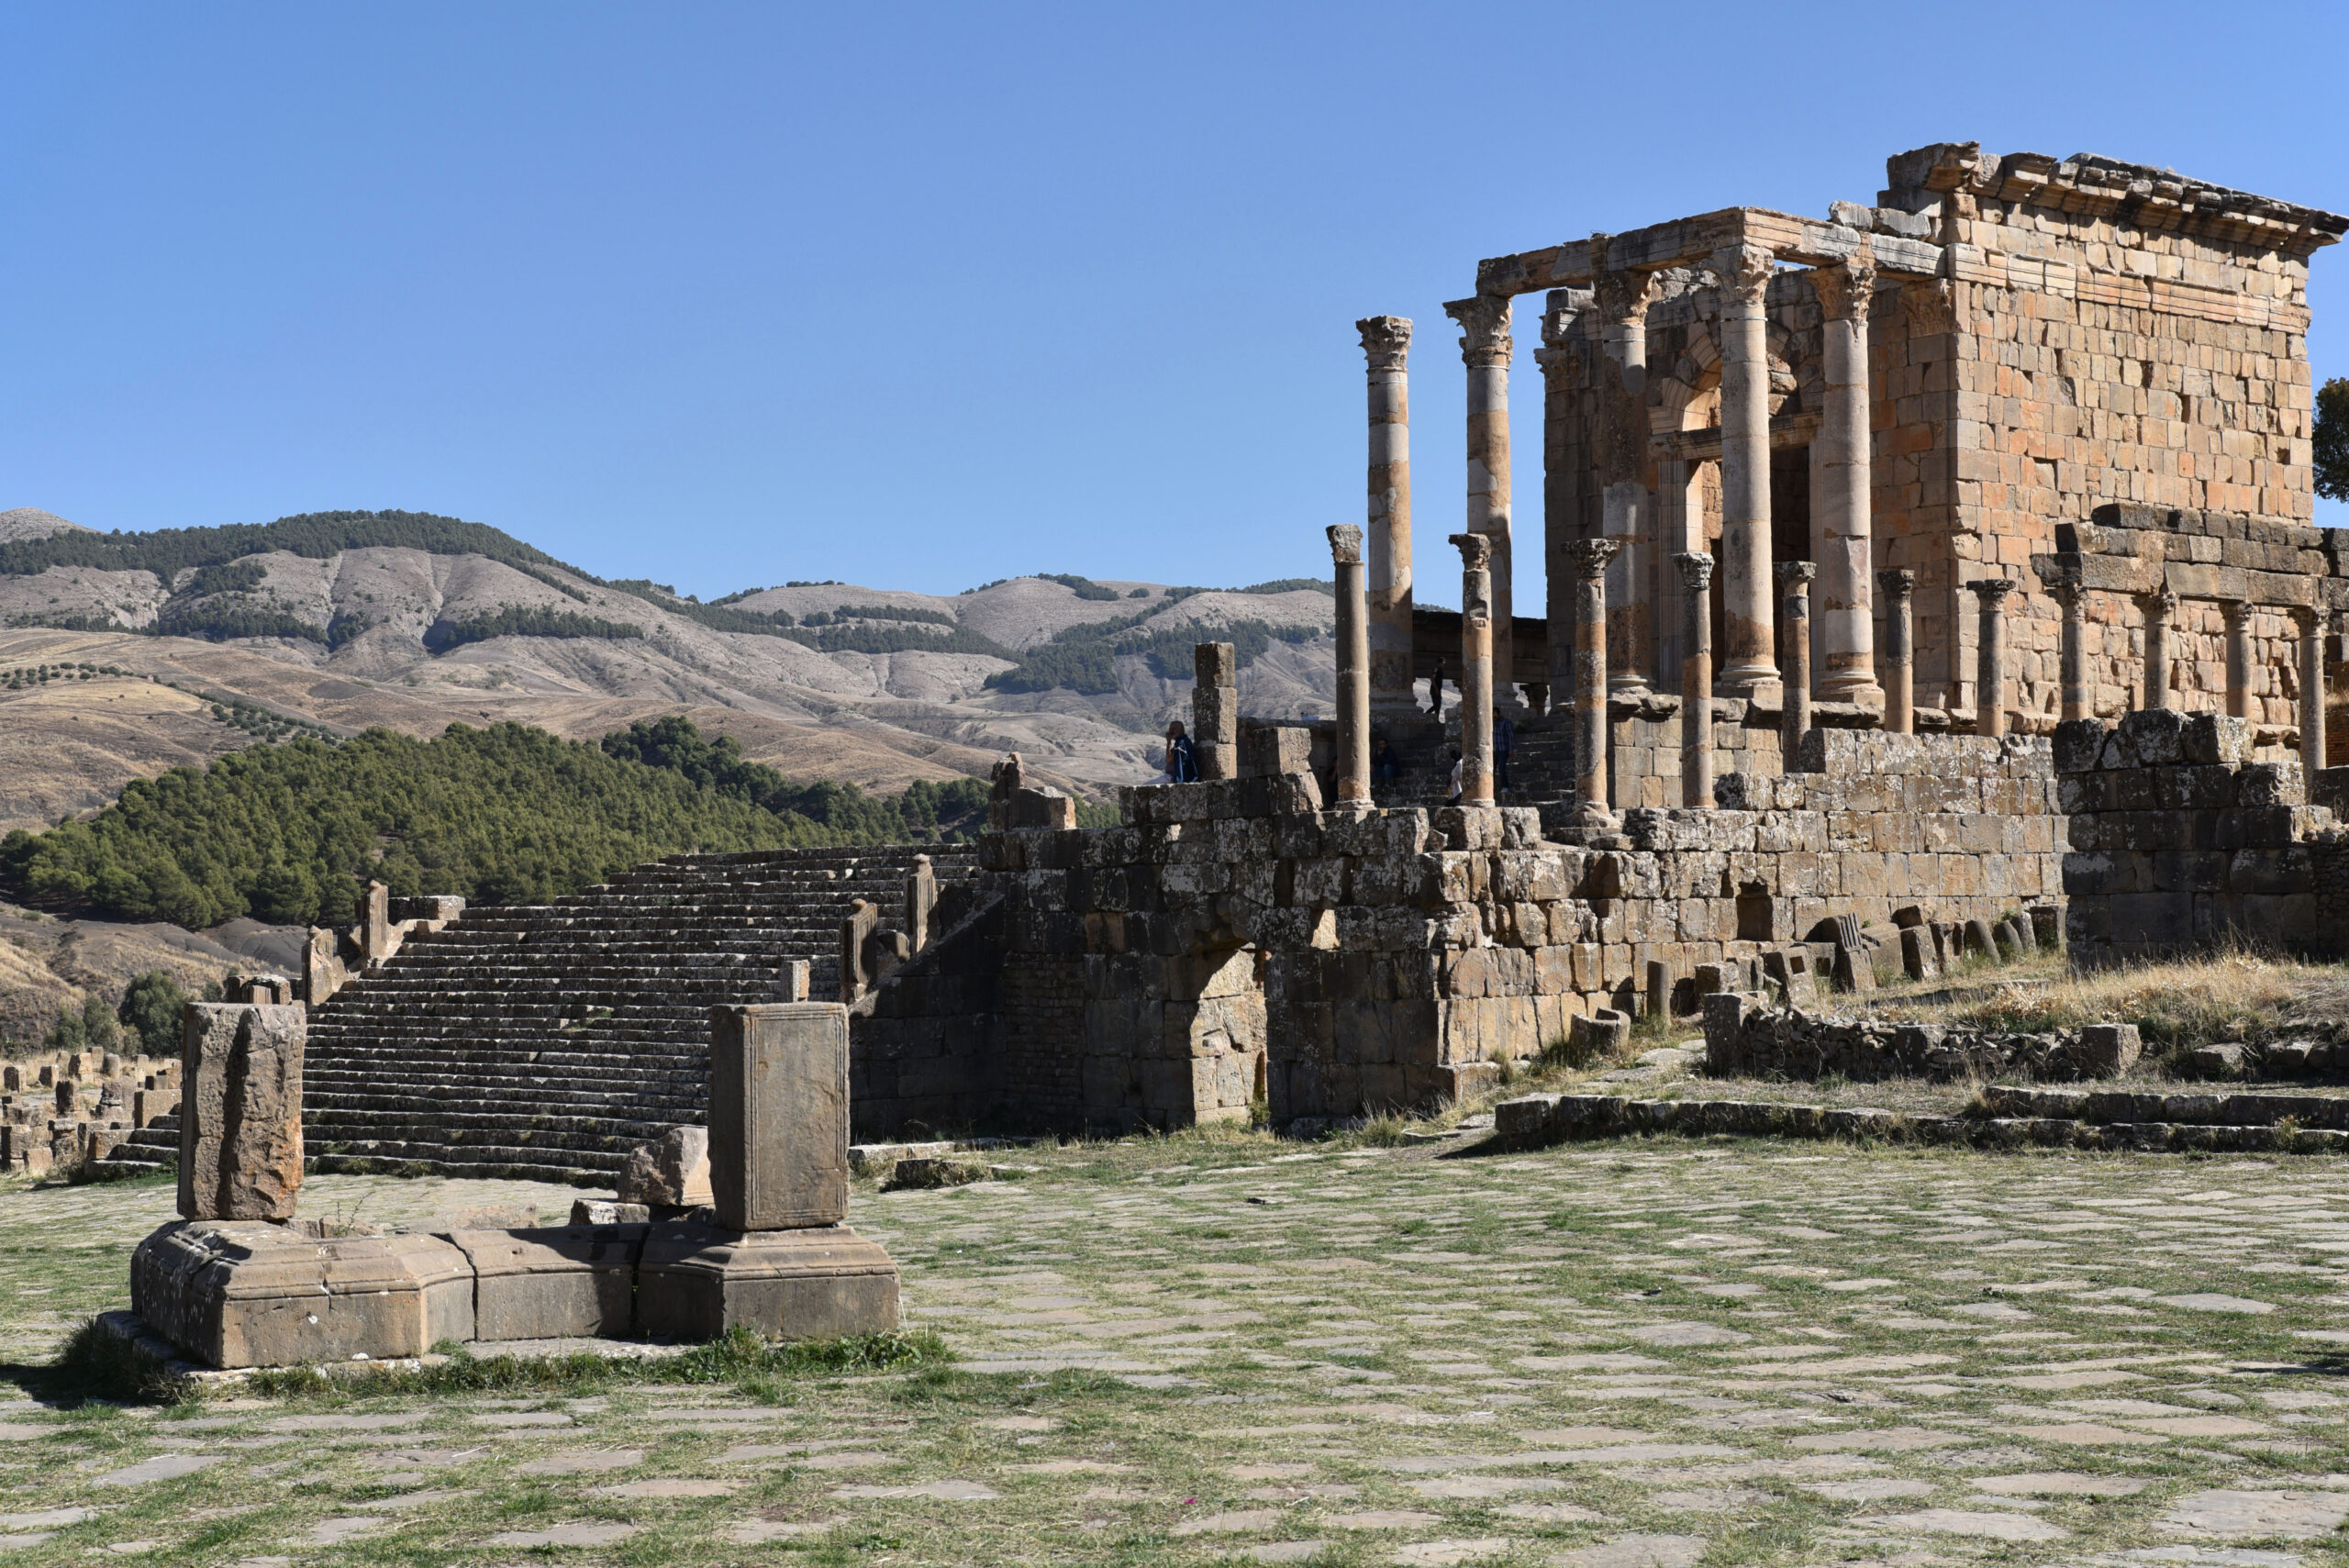 The Roman archaeological site at Djémila (Cuicul, Algeria) was recognized as a UNESCO World Heritage site in 1982. The Severan Forum and Temple of the Gens Septimia, Djémila (Cuicul, Algeria), 229 C.E. (photo: Carole Raddato, CC BY-SA 2.0)